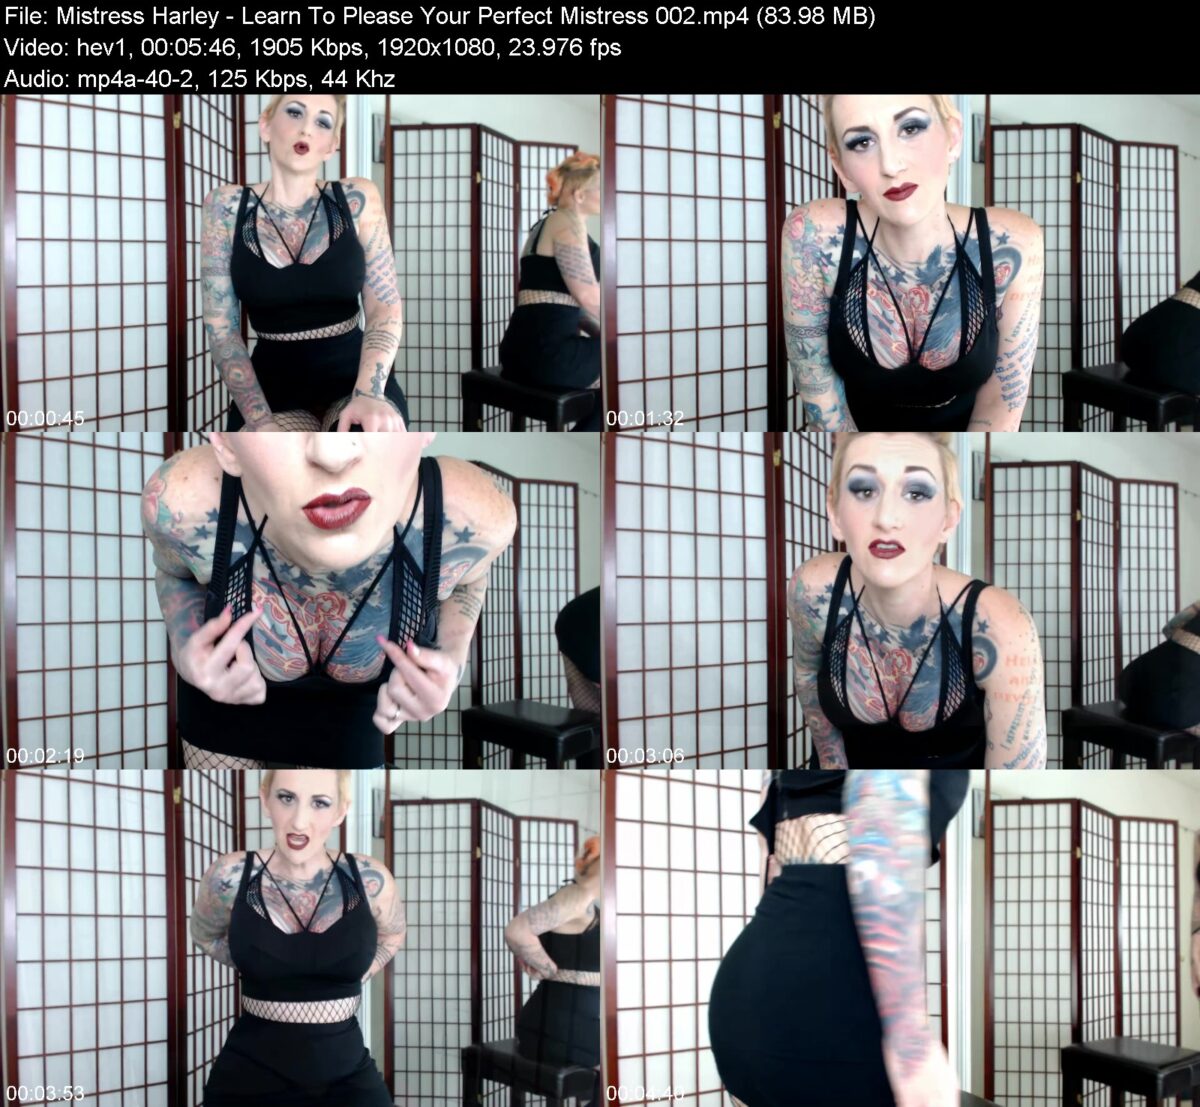 Mistress Harley - Learn To Please Your Perfect Mistress 002